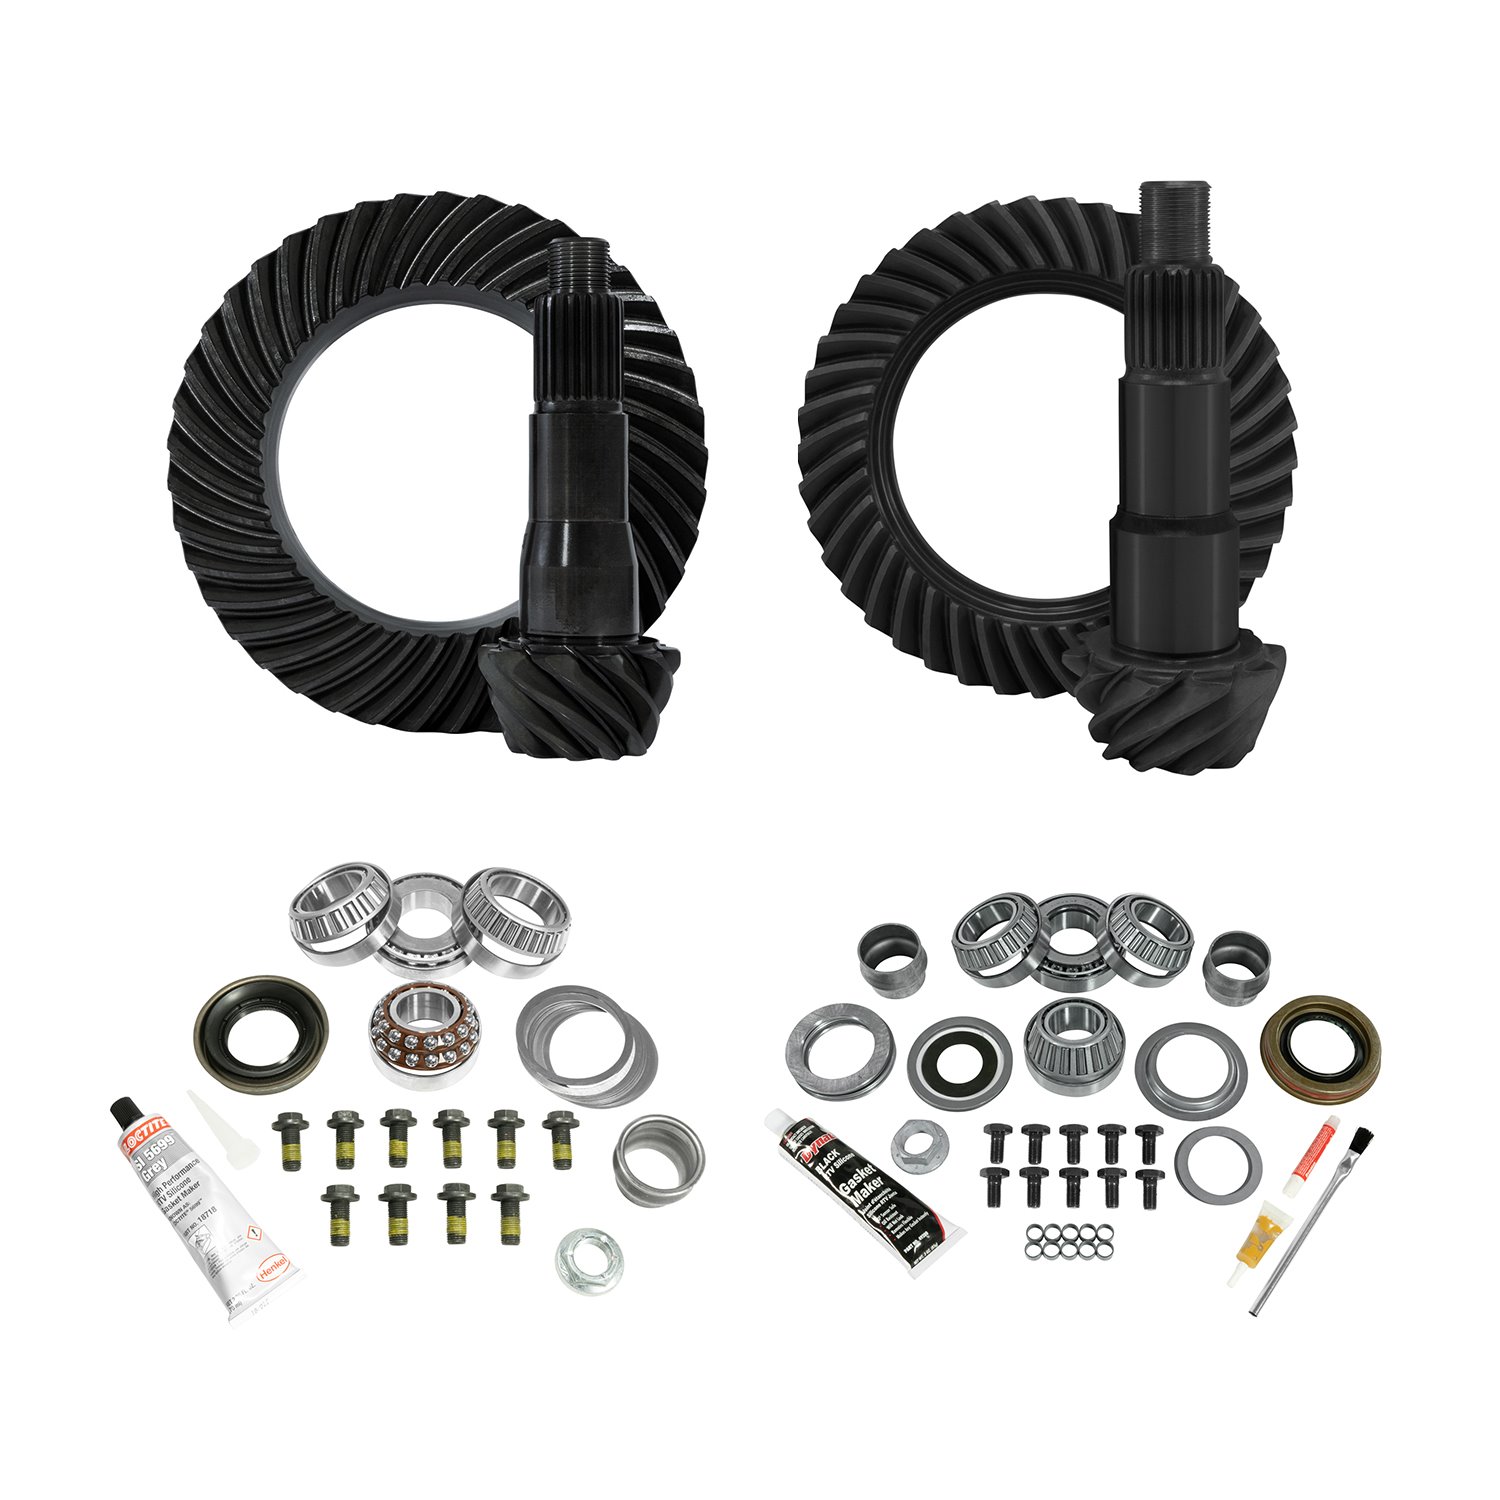 Re-Gear And Install Kit, D30 Front/D35 Rear, Jeep Jl Non-Rubicon, 4.88